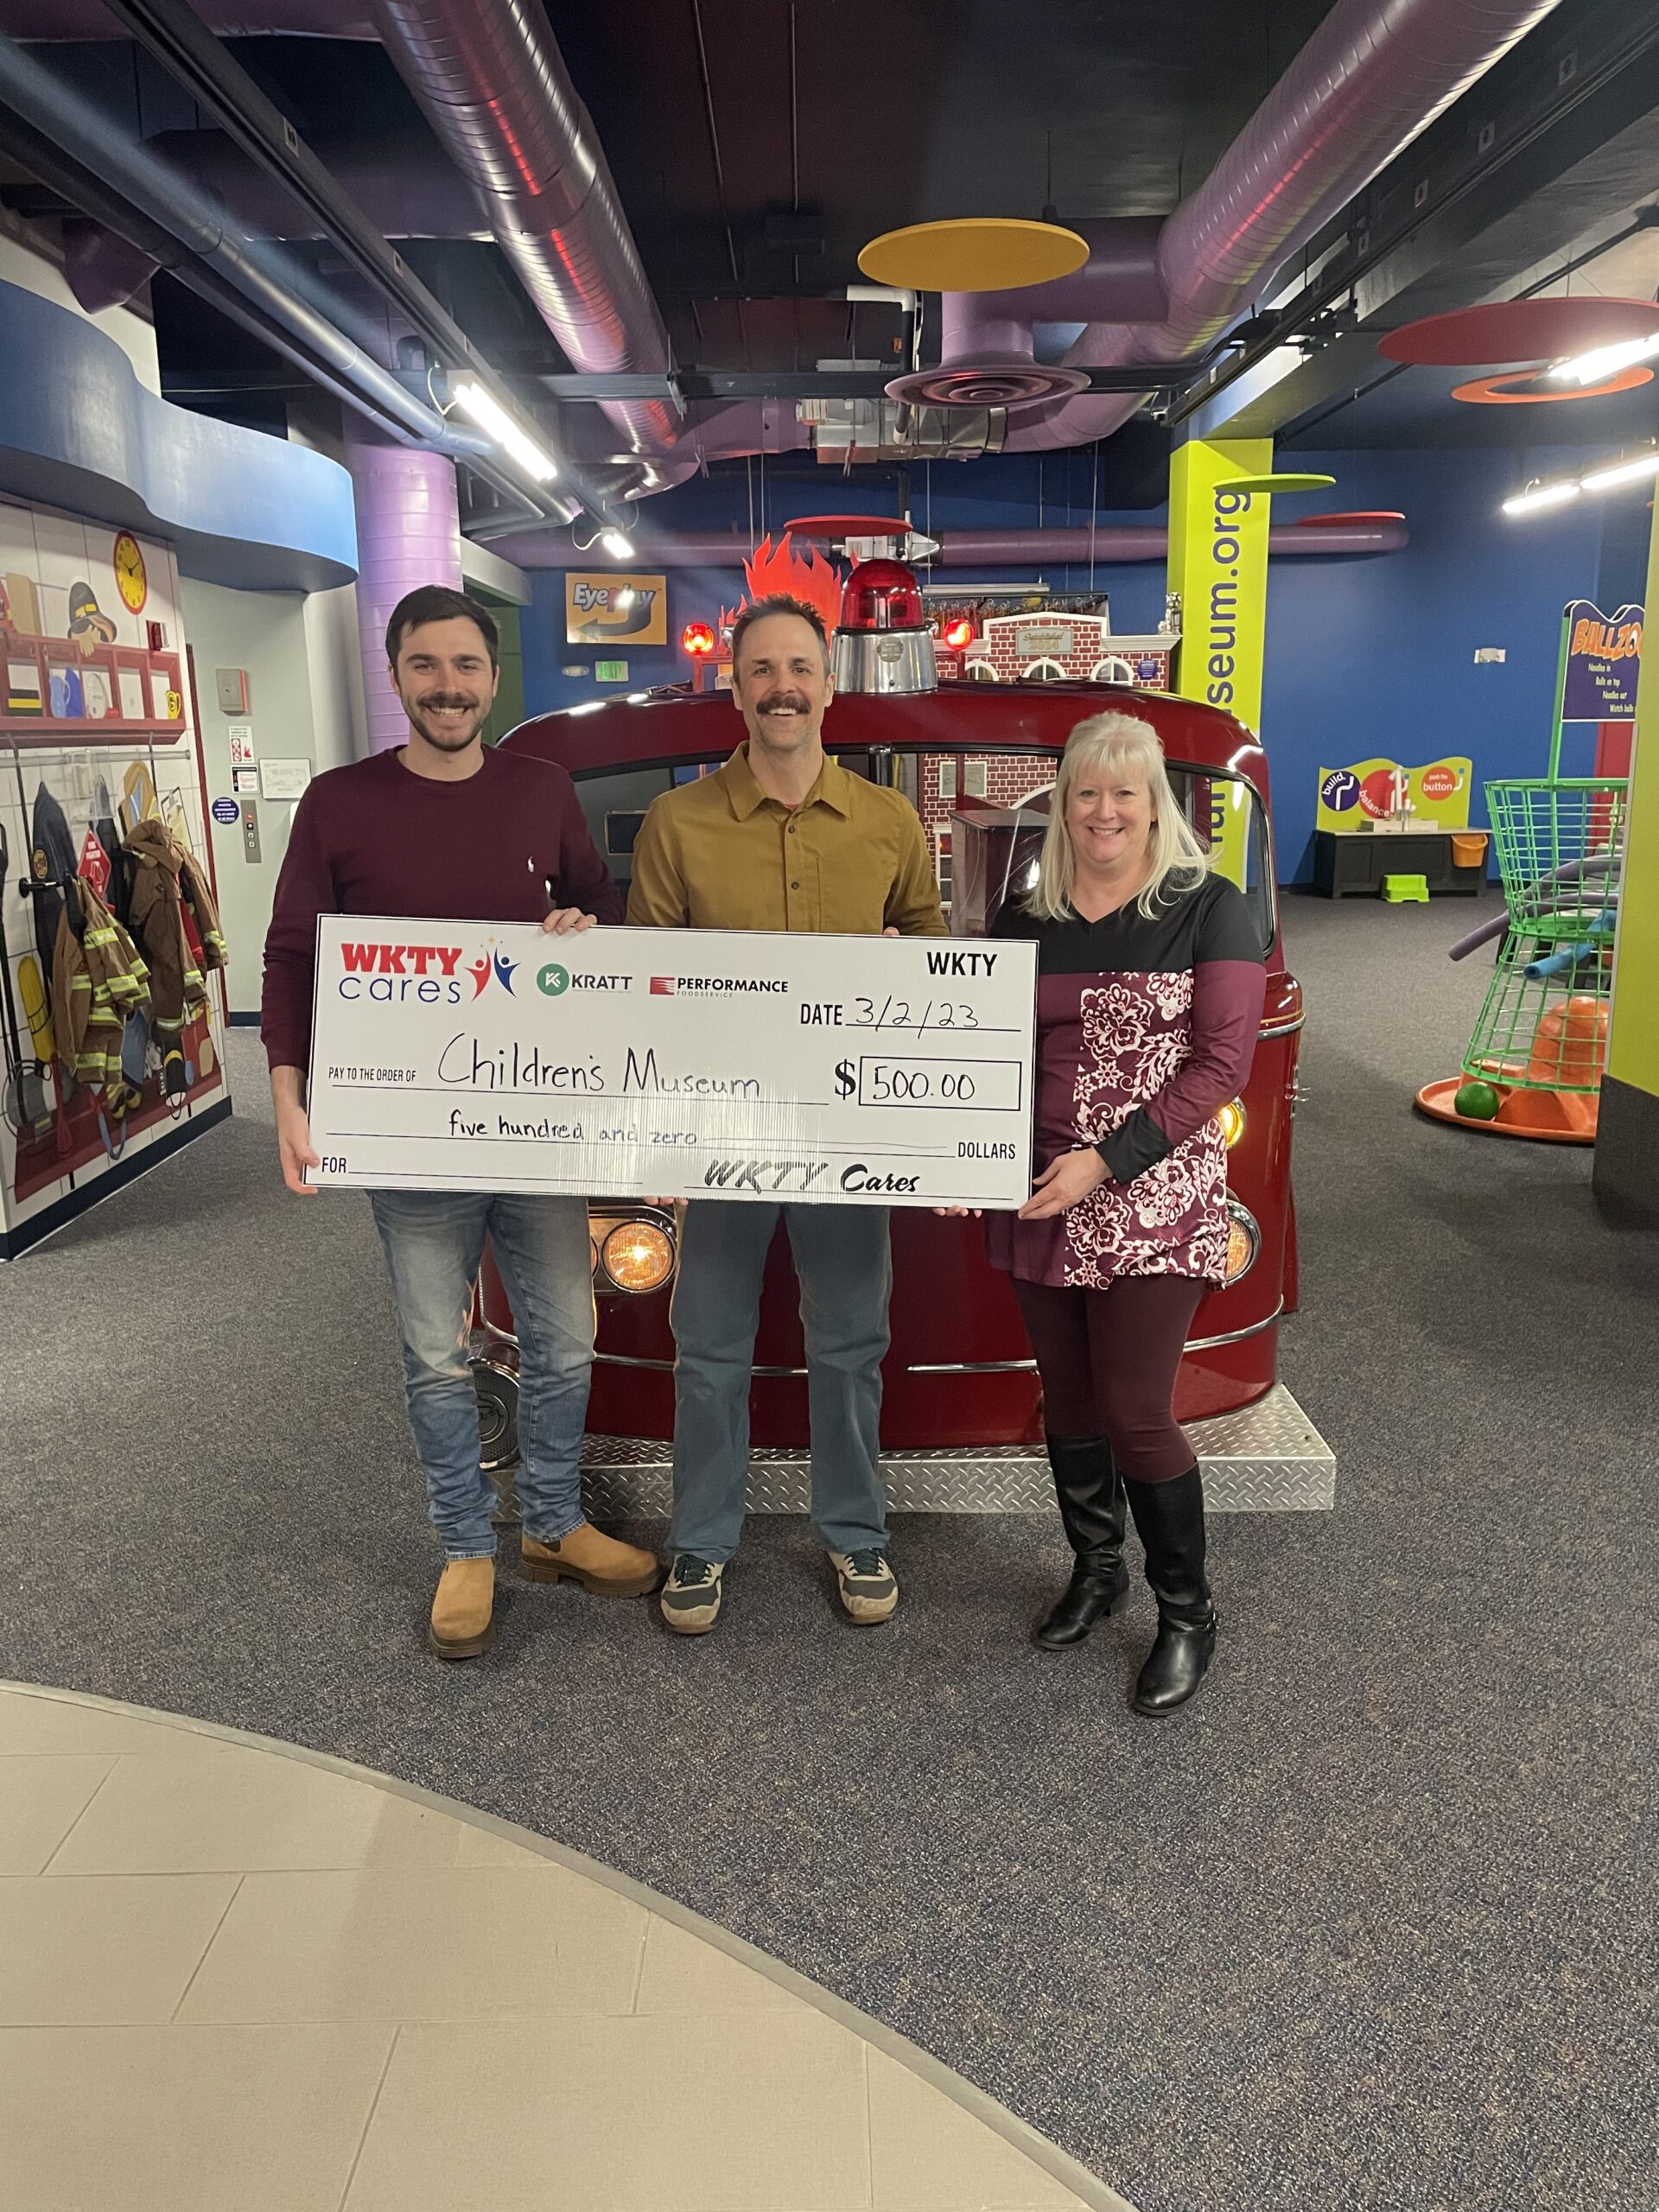 WKTY Cares about the La Crosse Children’s Museum